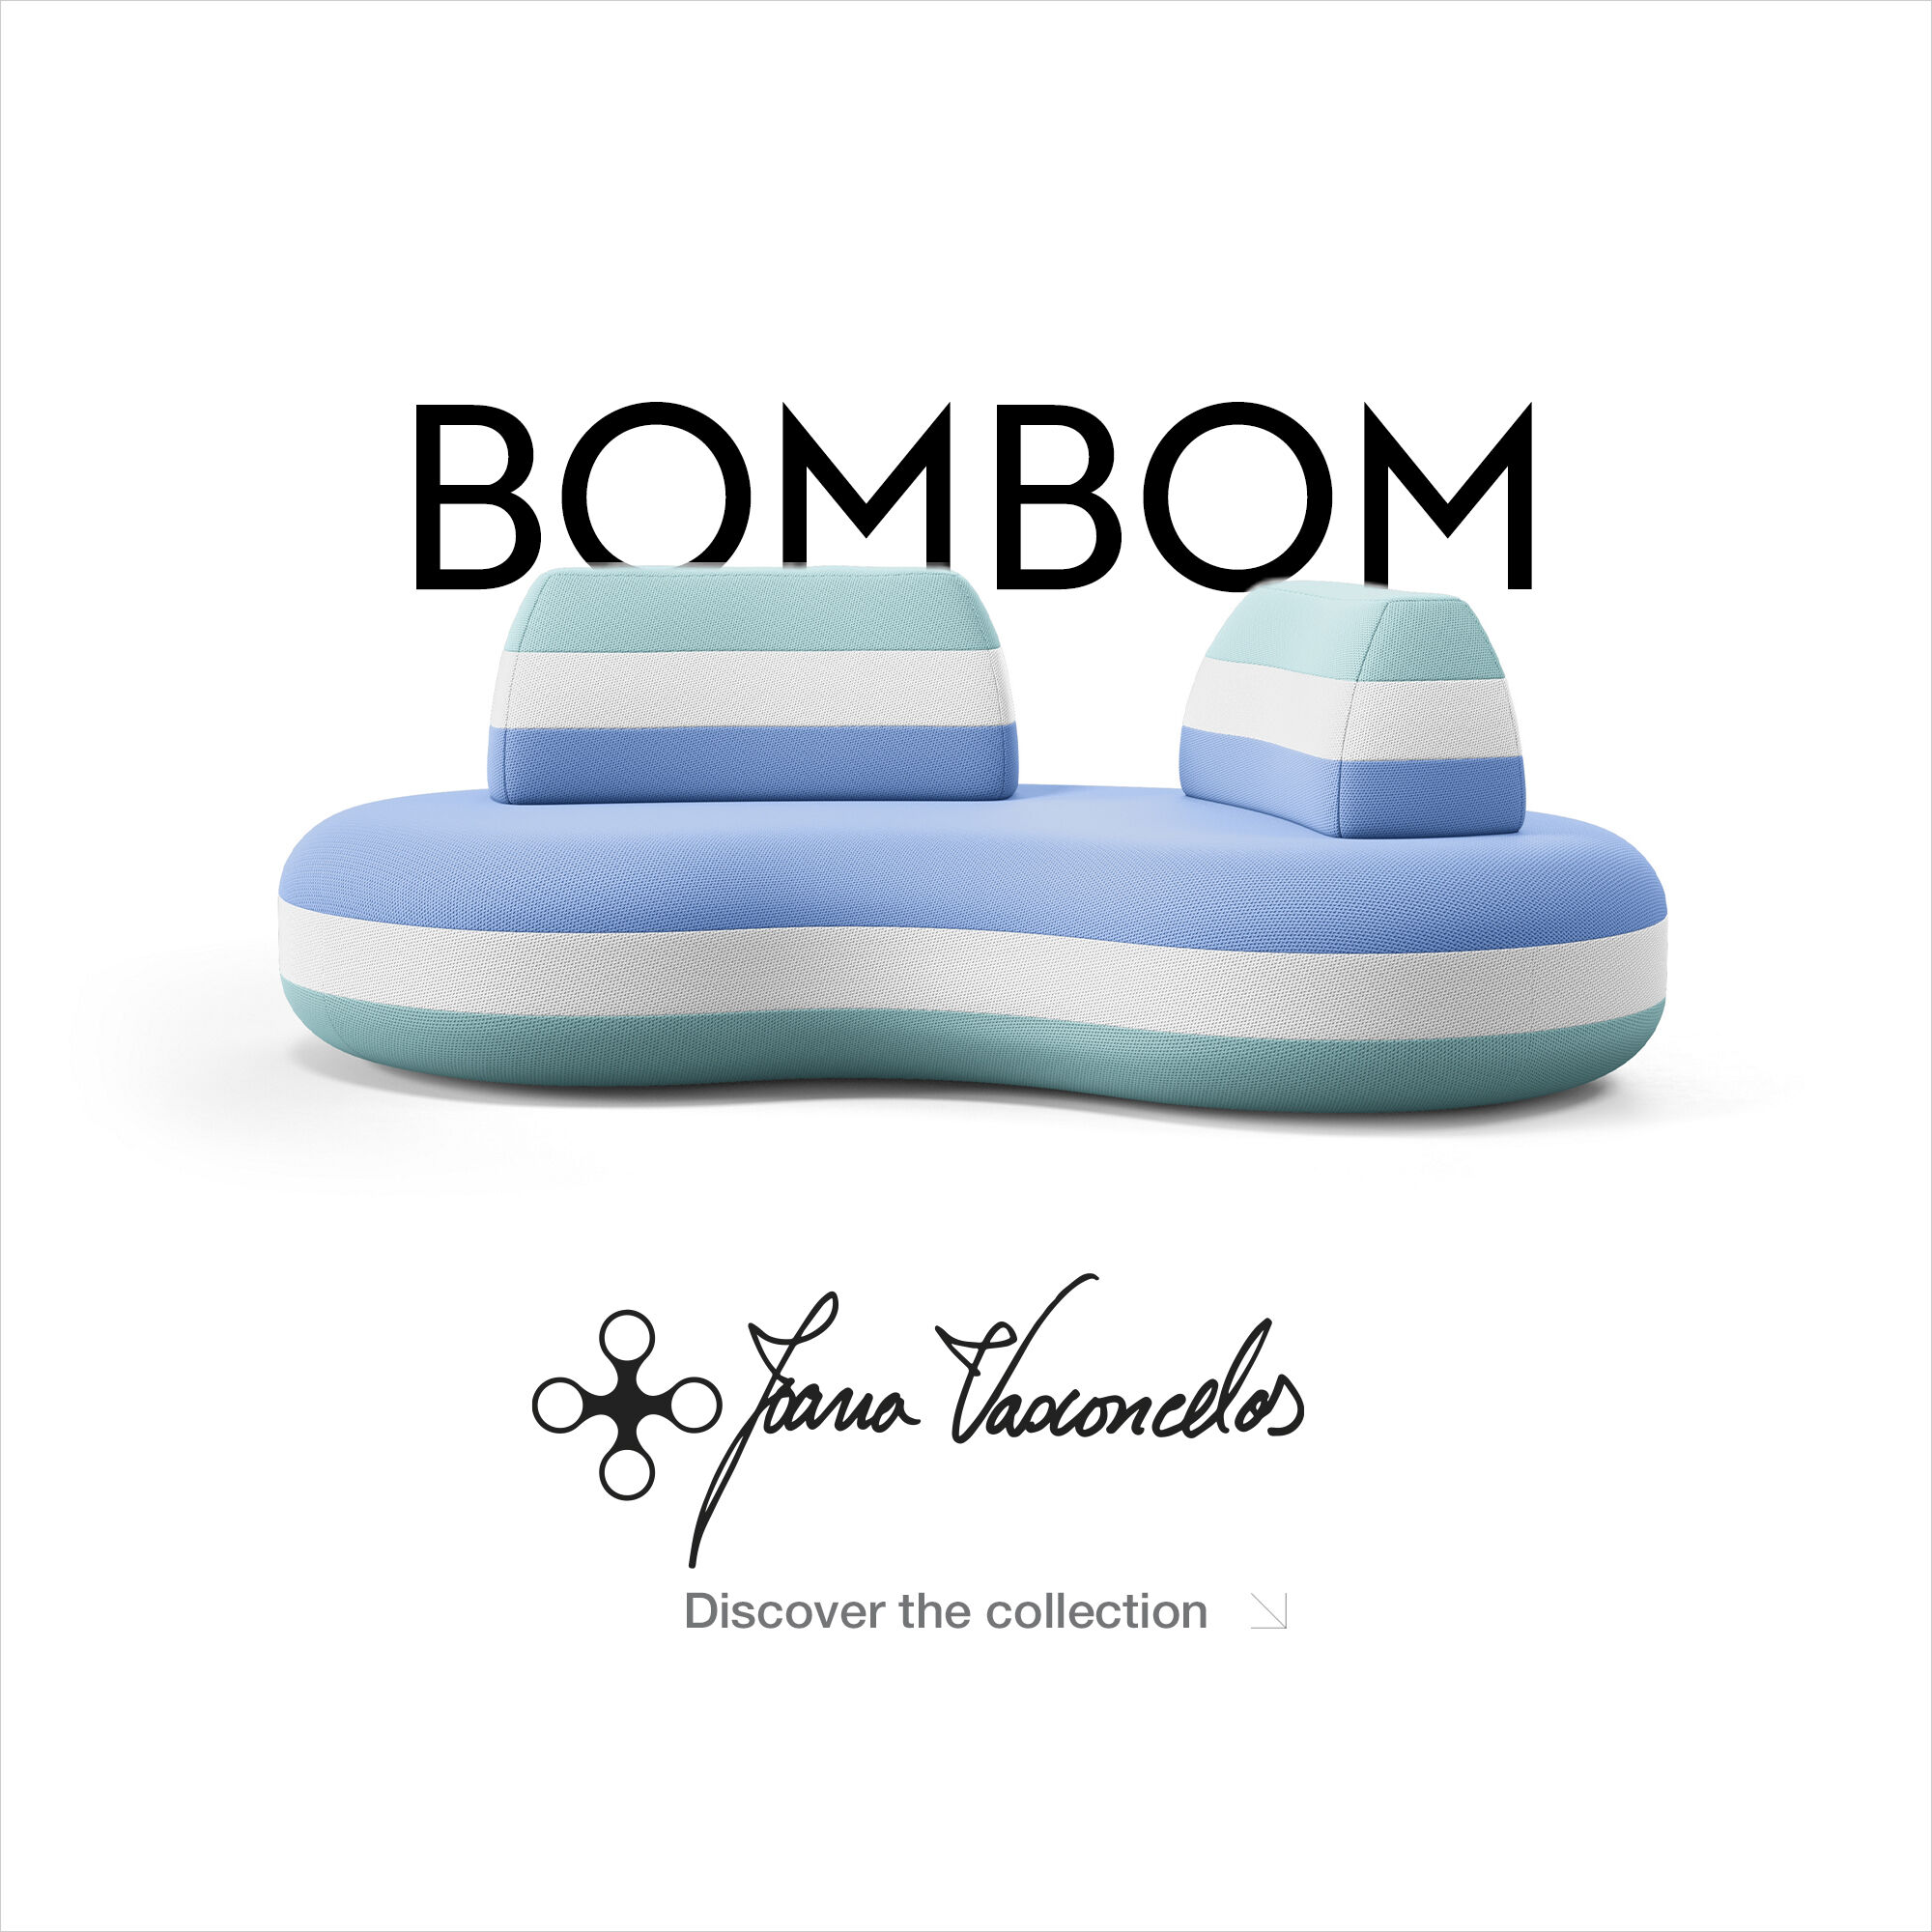 Discover the Bombom collection